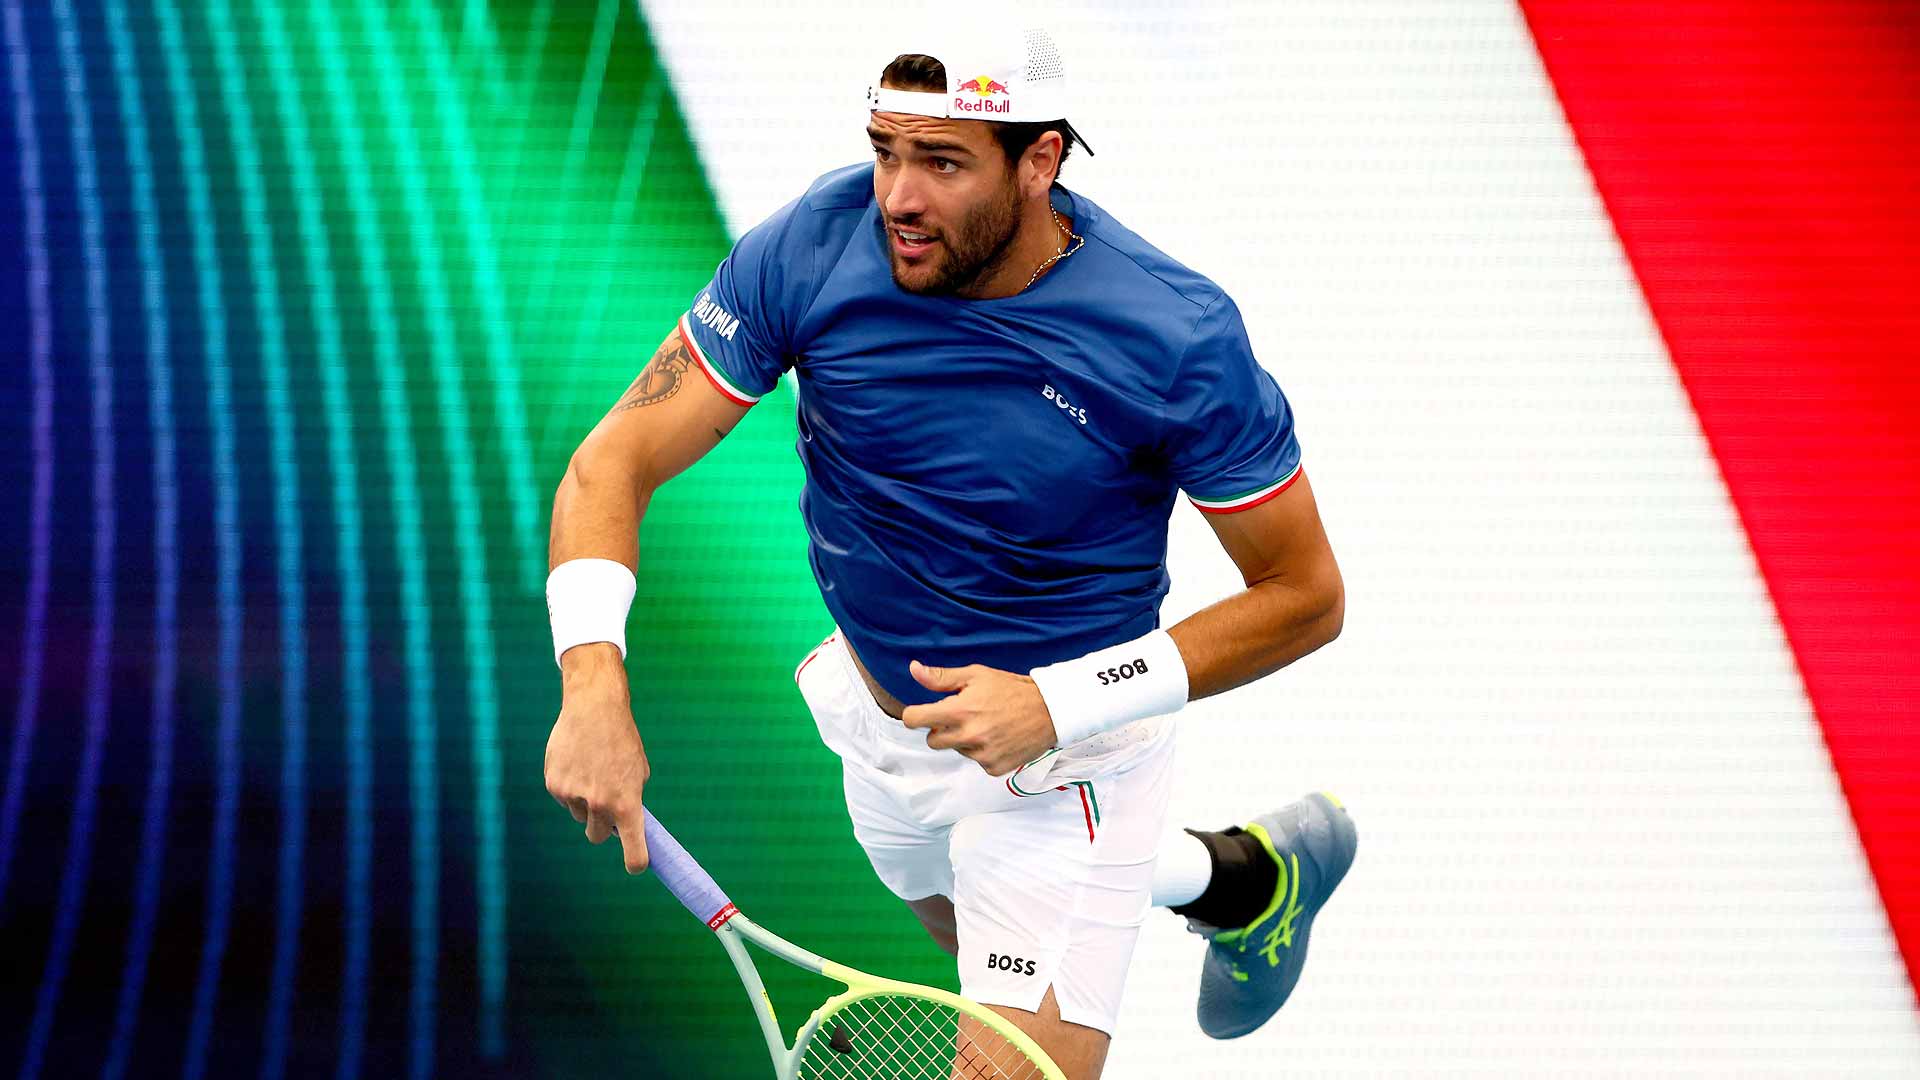 Matteo Berrettini wins 88 per cent of his first-serve points en route to a straight-sets victory against Casper Ruud.